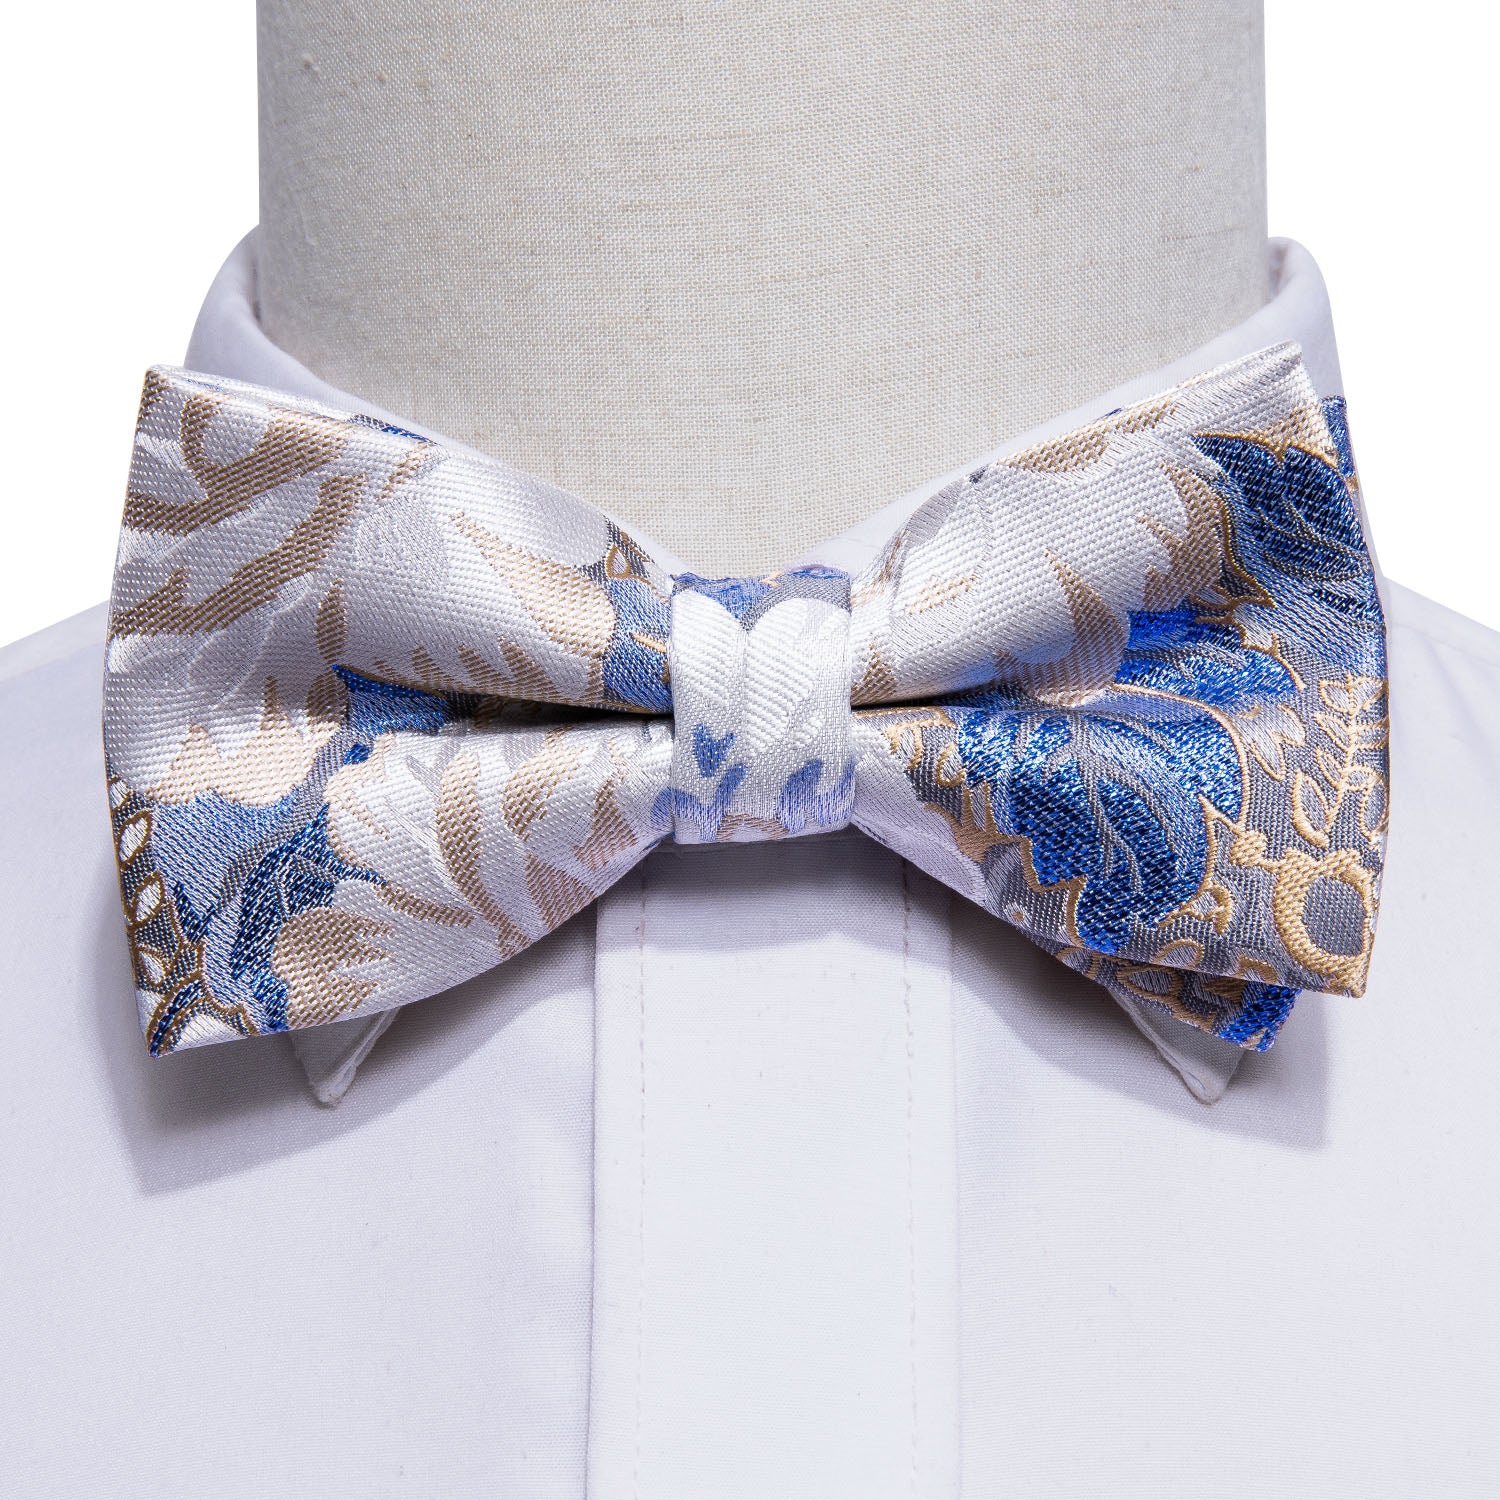 Barry.wang White Tie Blue Floral Pre-tied Bow Tie Hanky Cufflinks Set